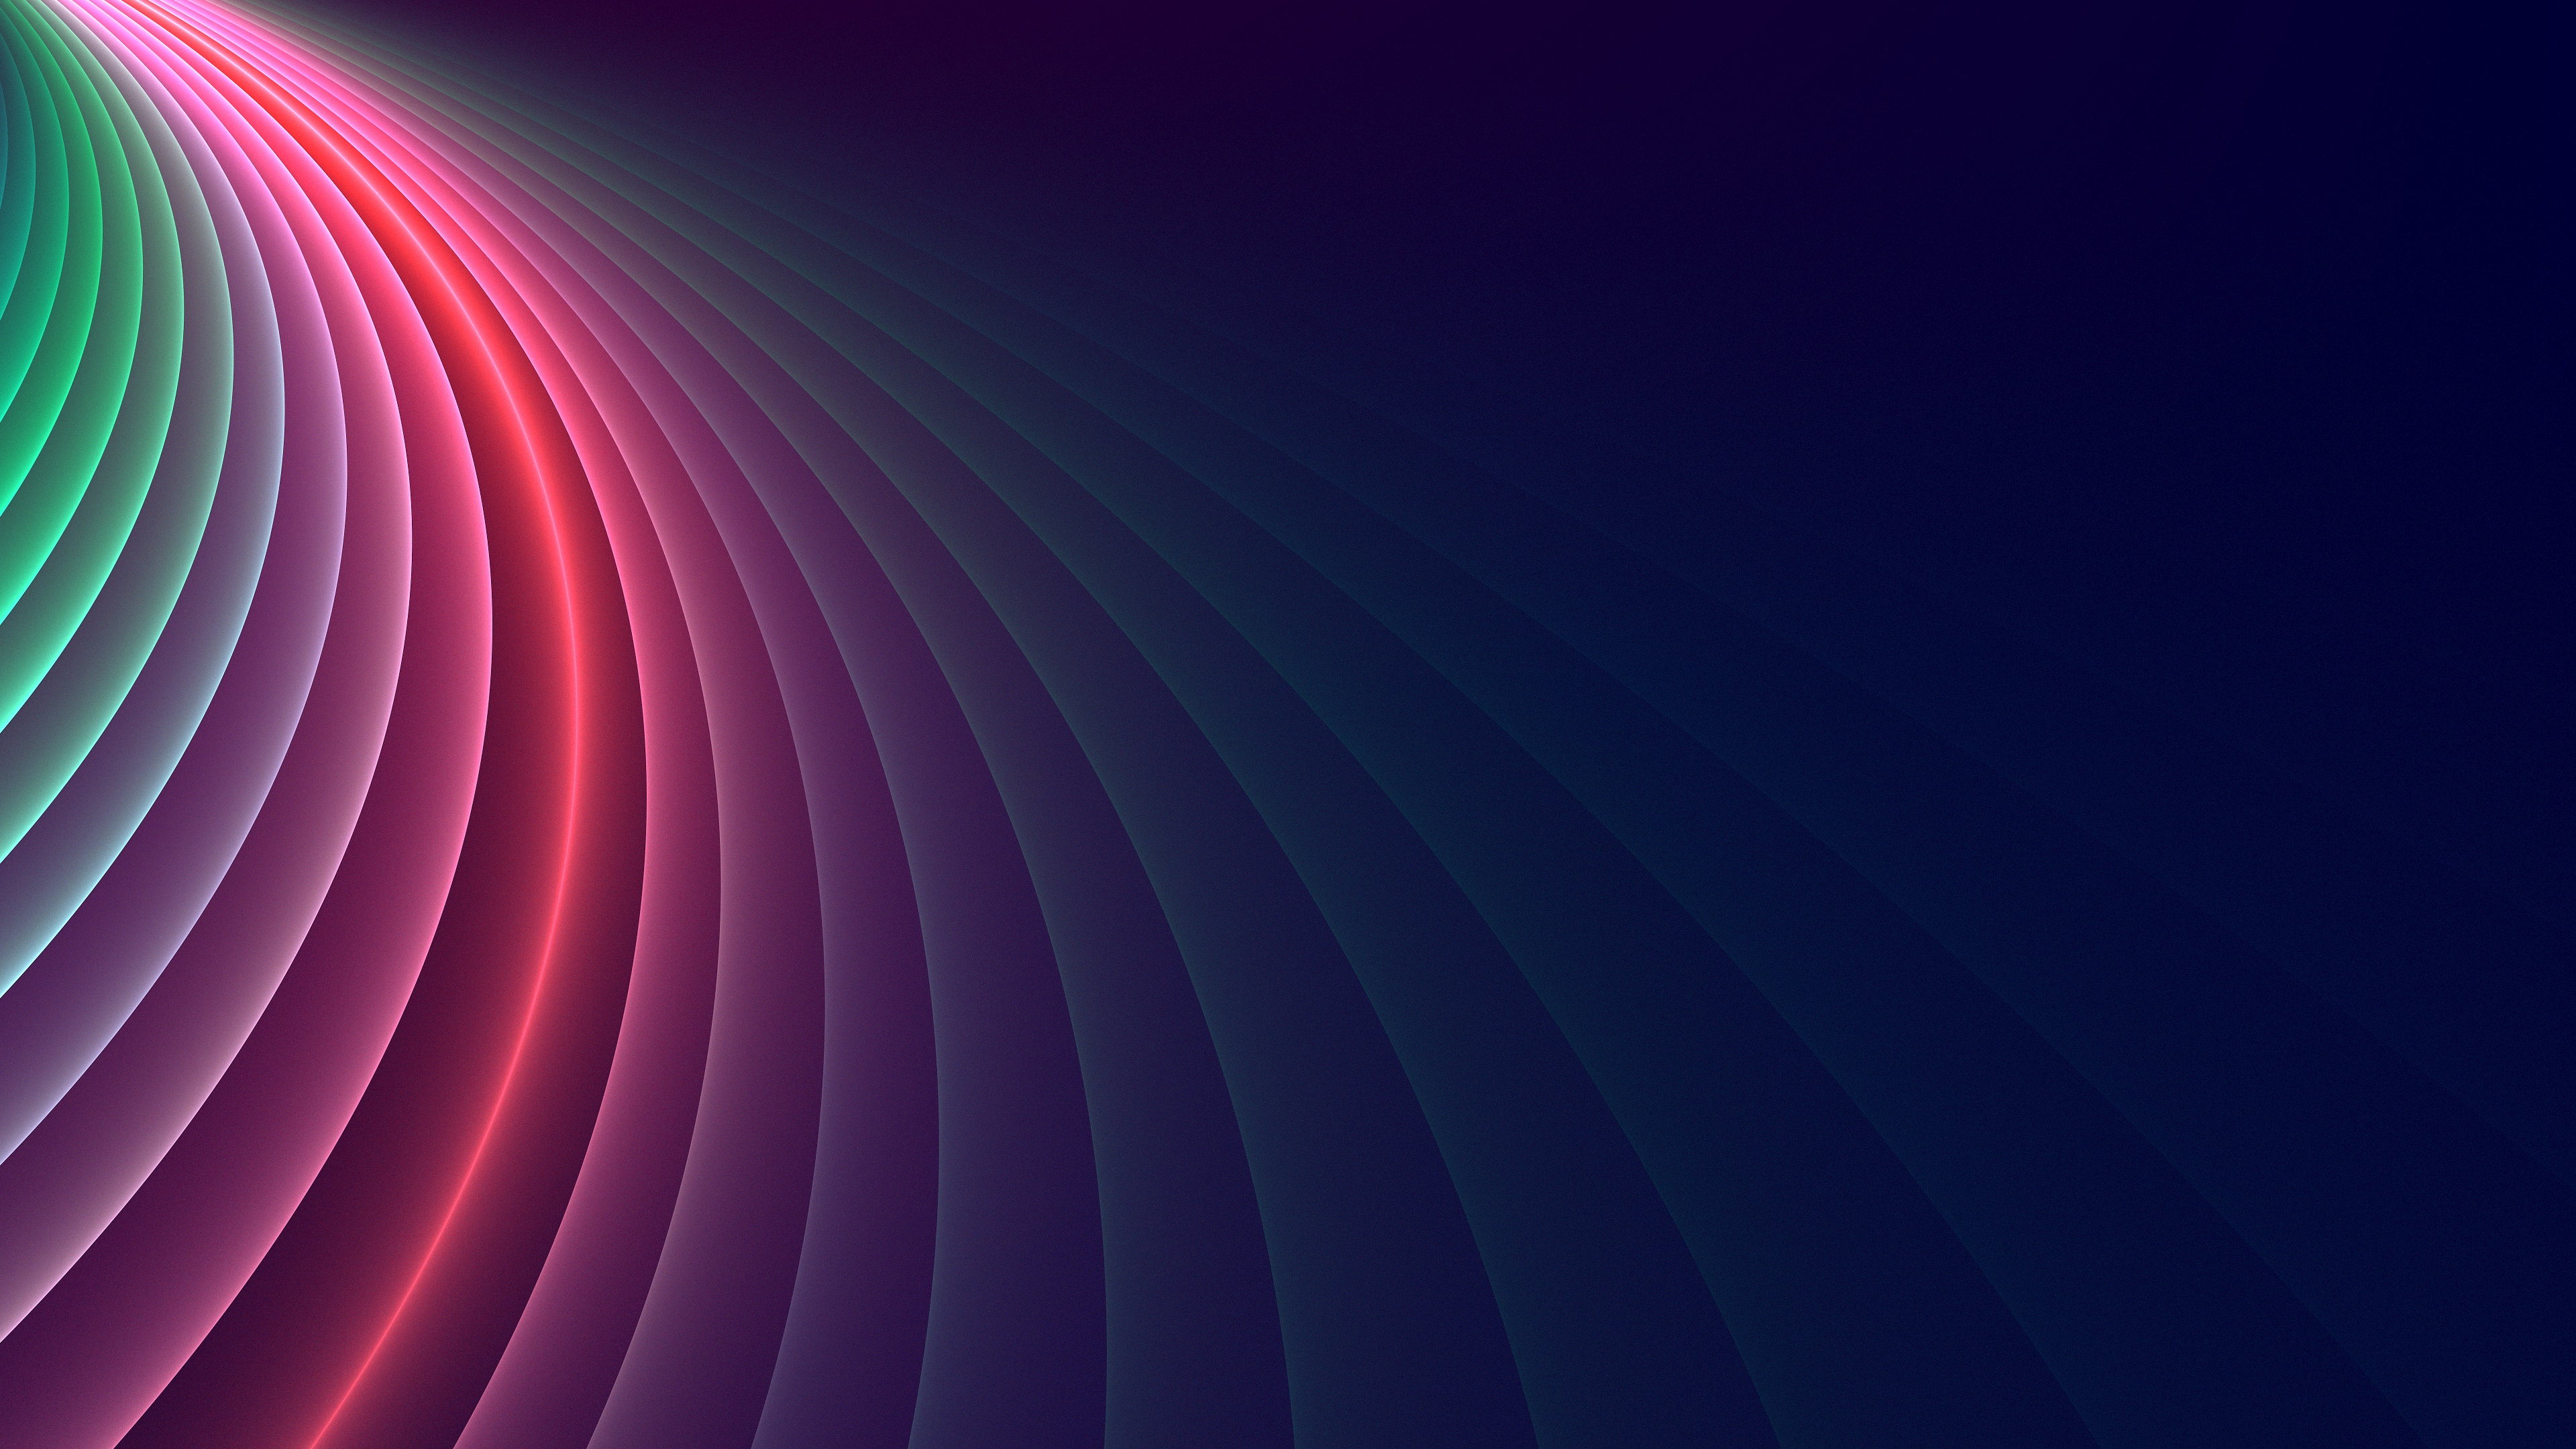 Lines Colorful Artistic 3840x2160